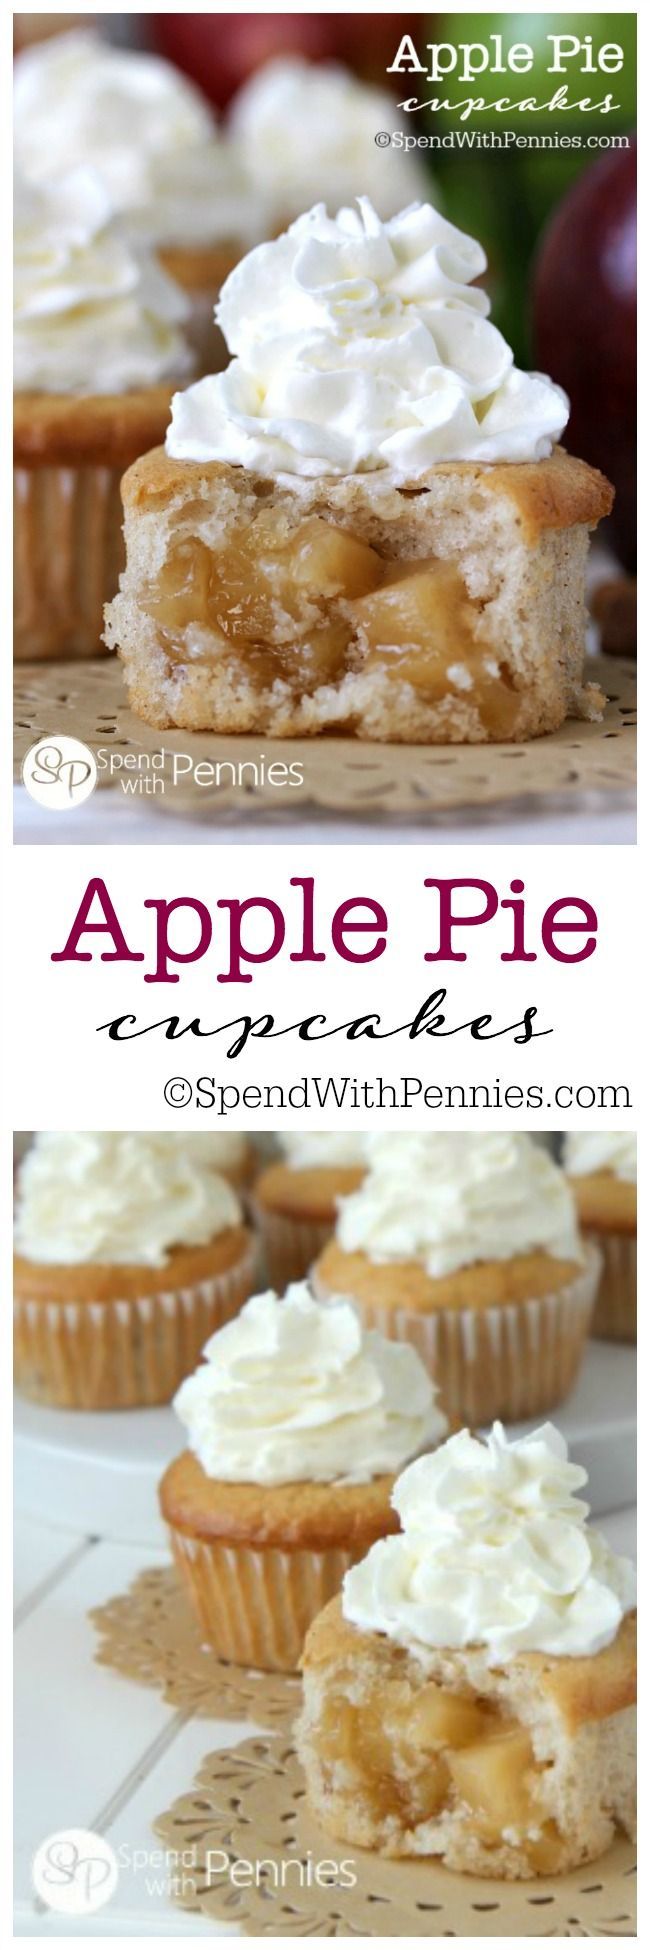 Apple Pie Cupcakes!! Our favorite cupcakes ever! Soft fluffy cinnamon cupcakes with a surprise apple pie filling in the center!